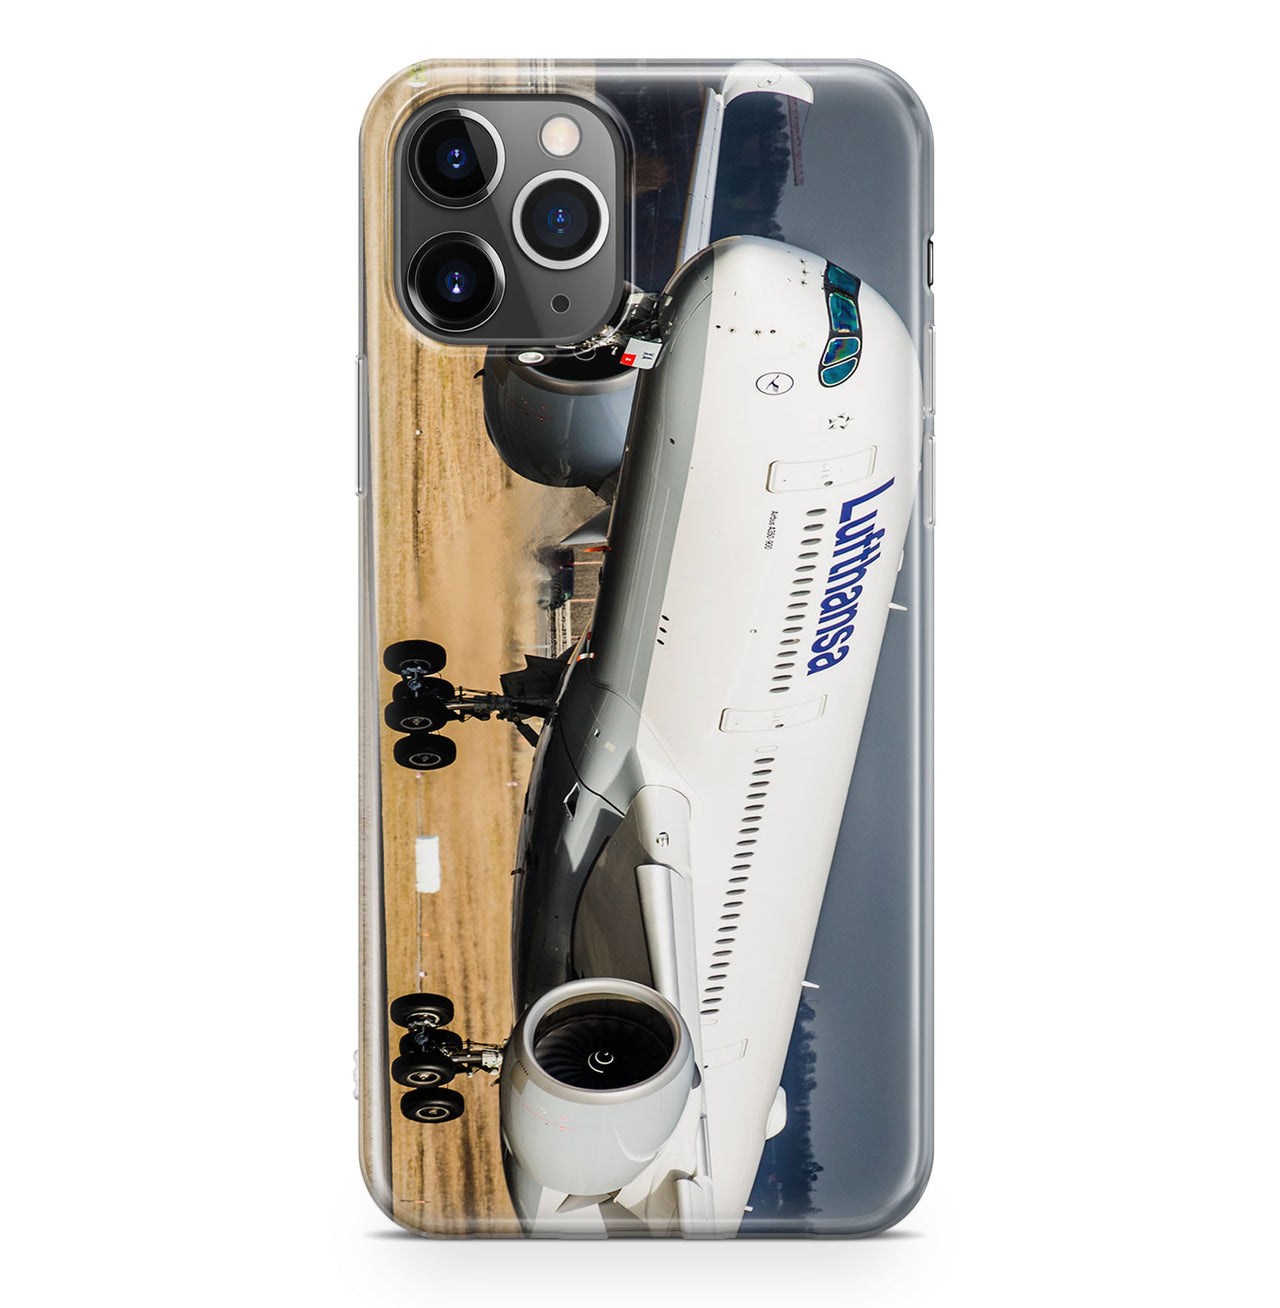 Lufthansa's A350 Designed iPhone Cases